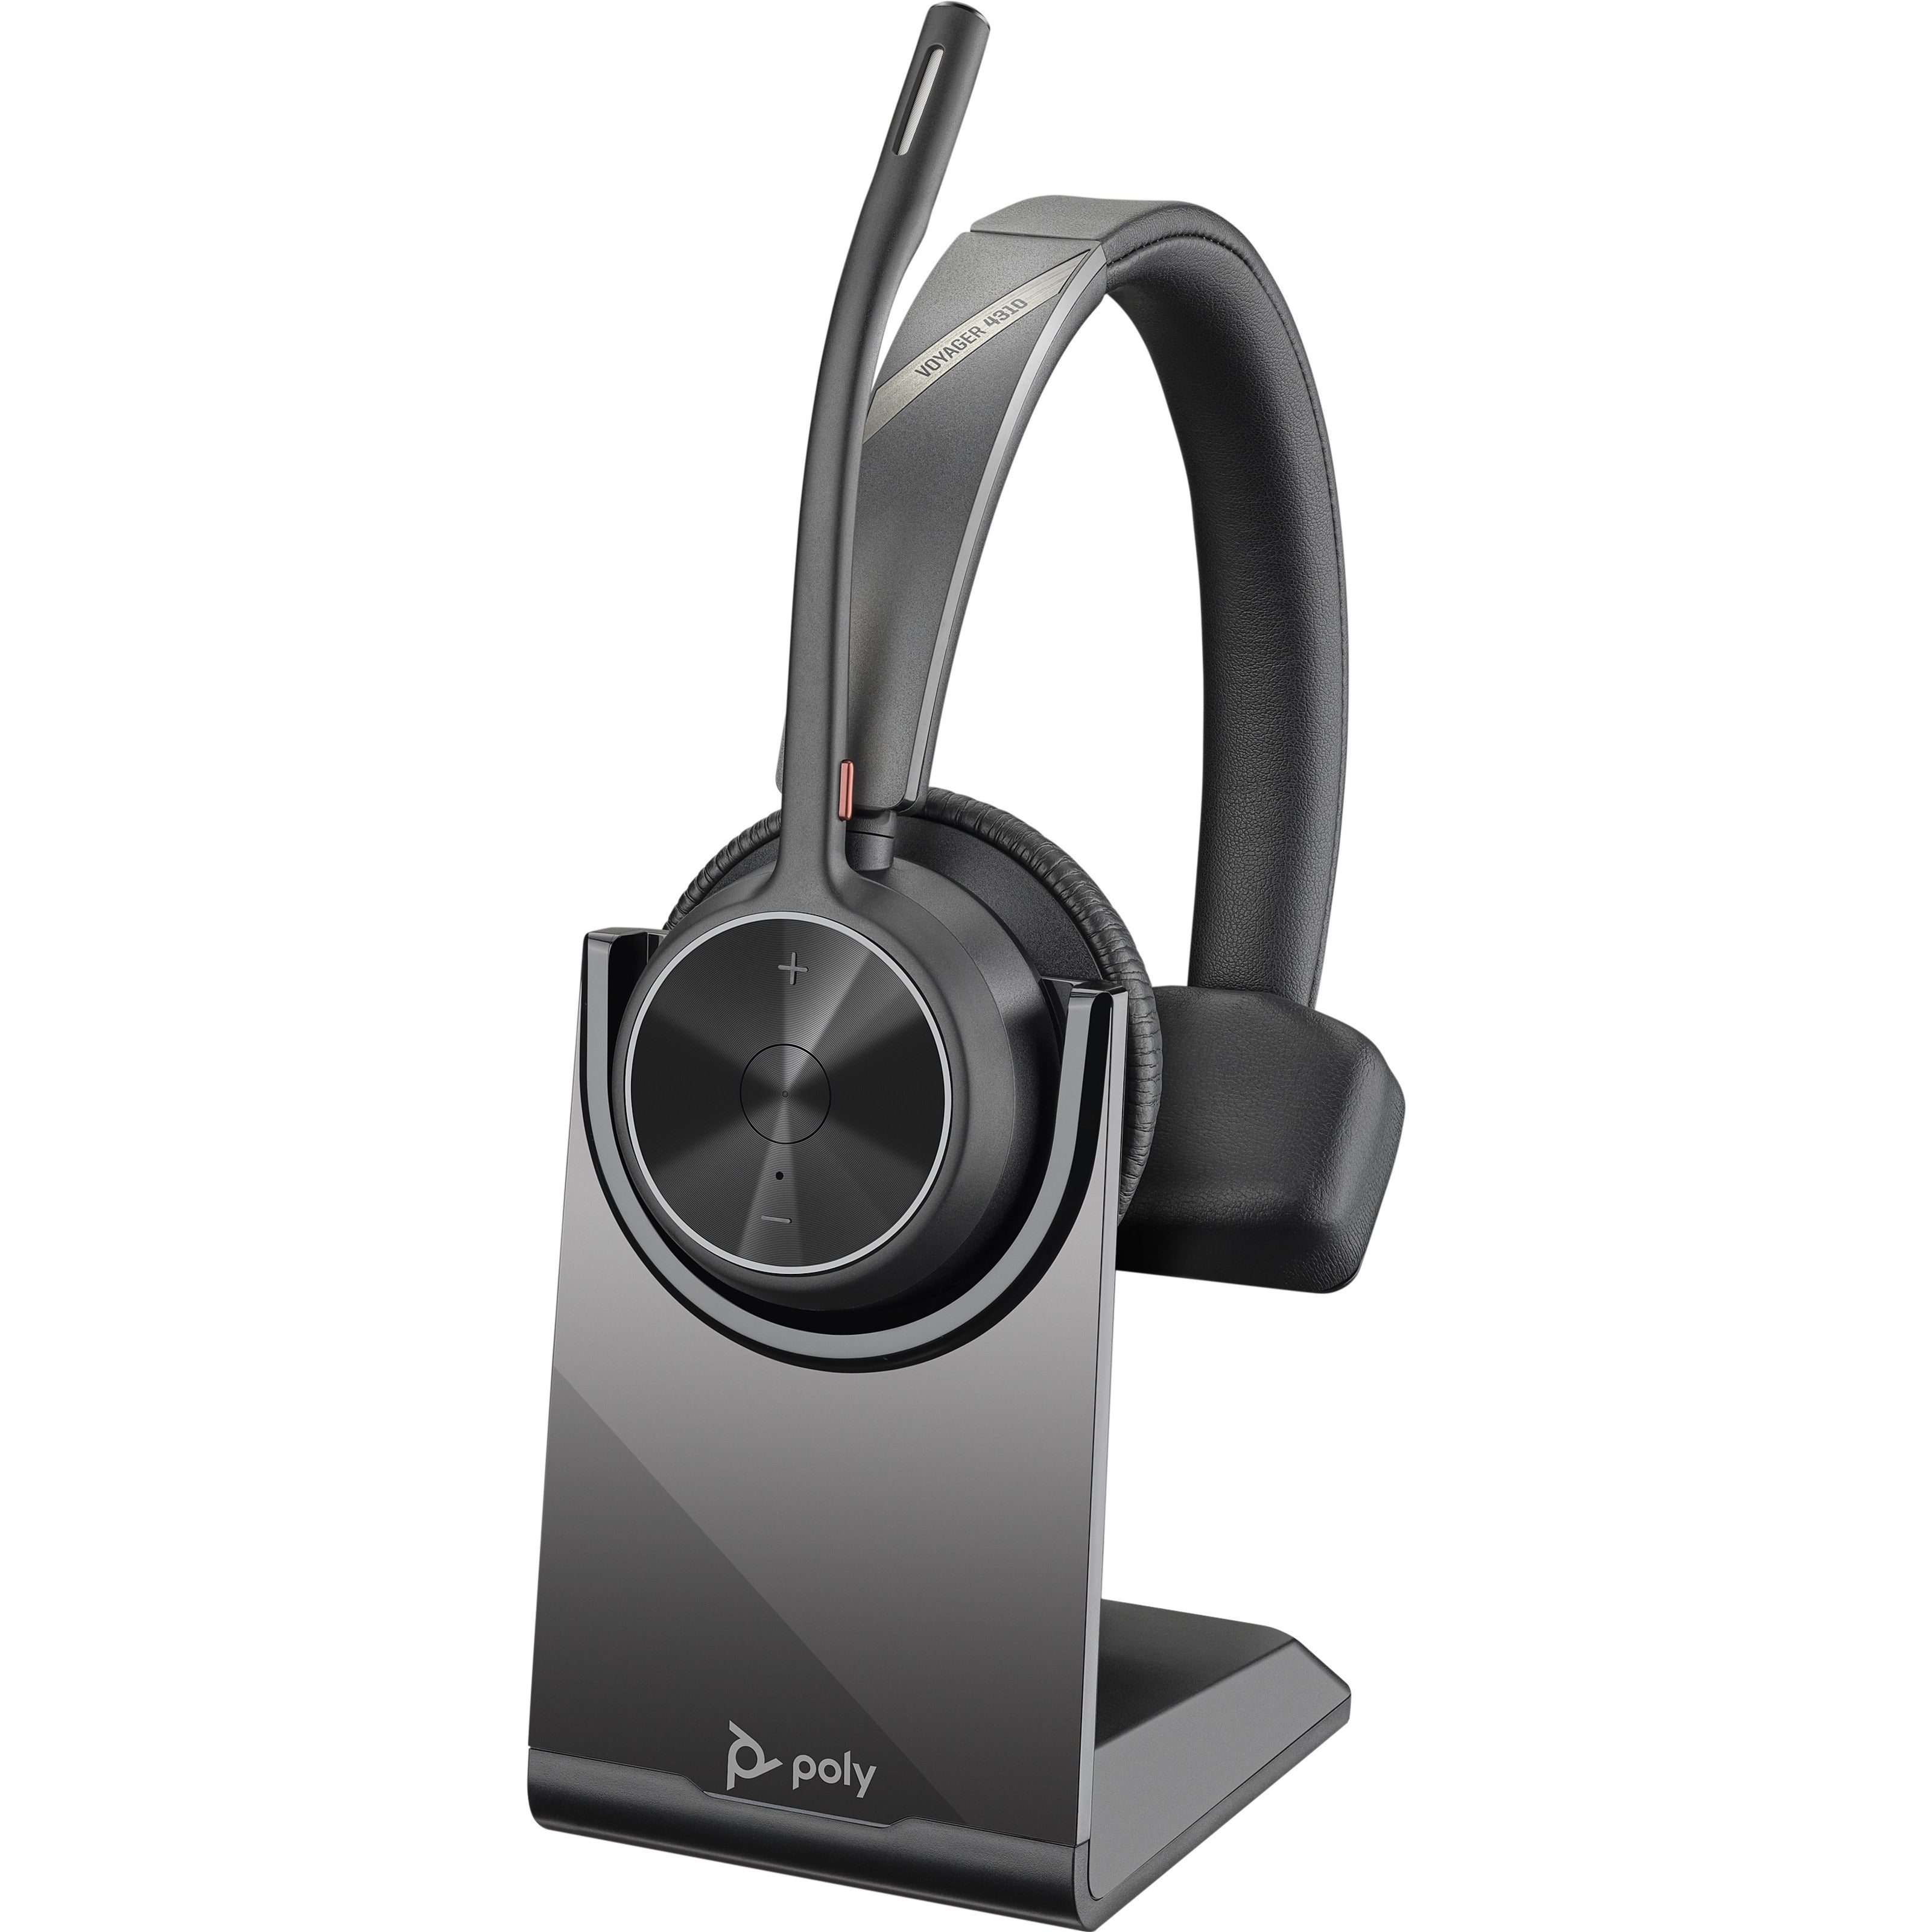 Poly 218471-01 Voyager 4300 UC 4310 C Headset, Mono, Noise Cancelling, USB Type A